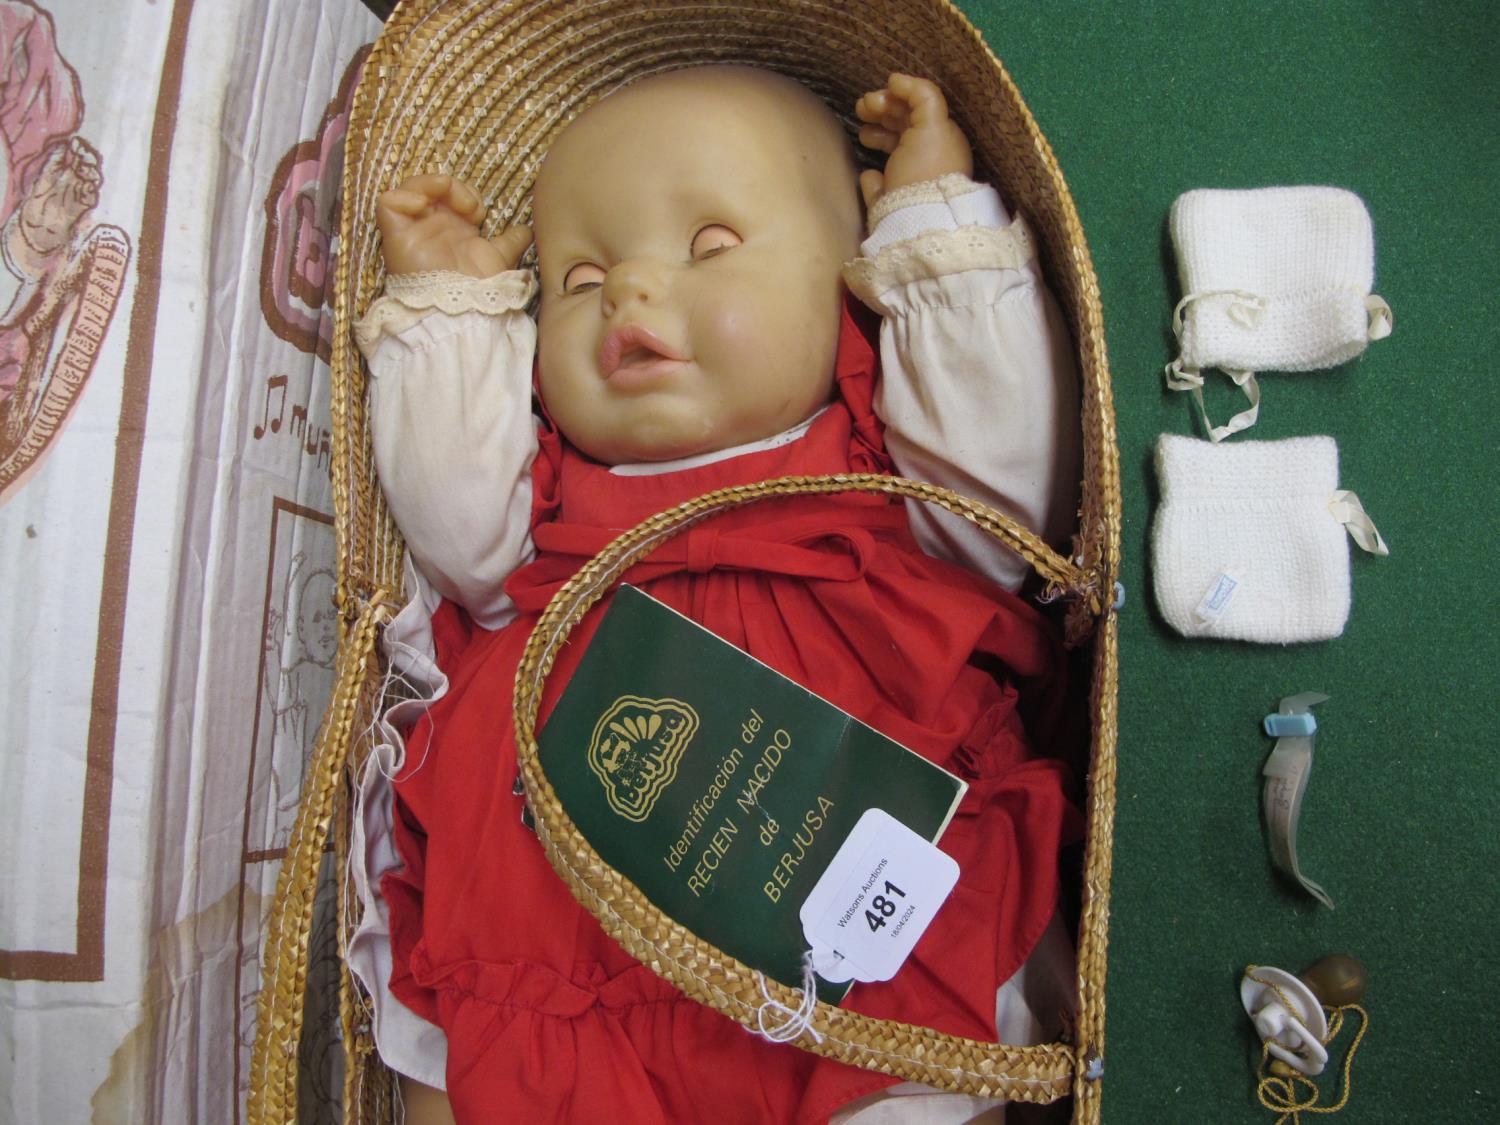 Berjusa (Spain) Baby Doll named Minene, date of birth: 21 February 1981 with original basket and - Image 2 of 3